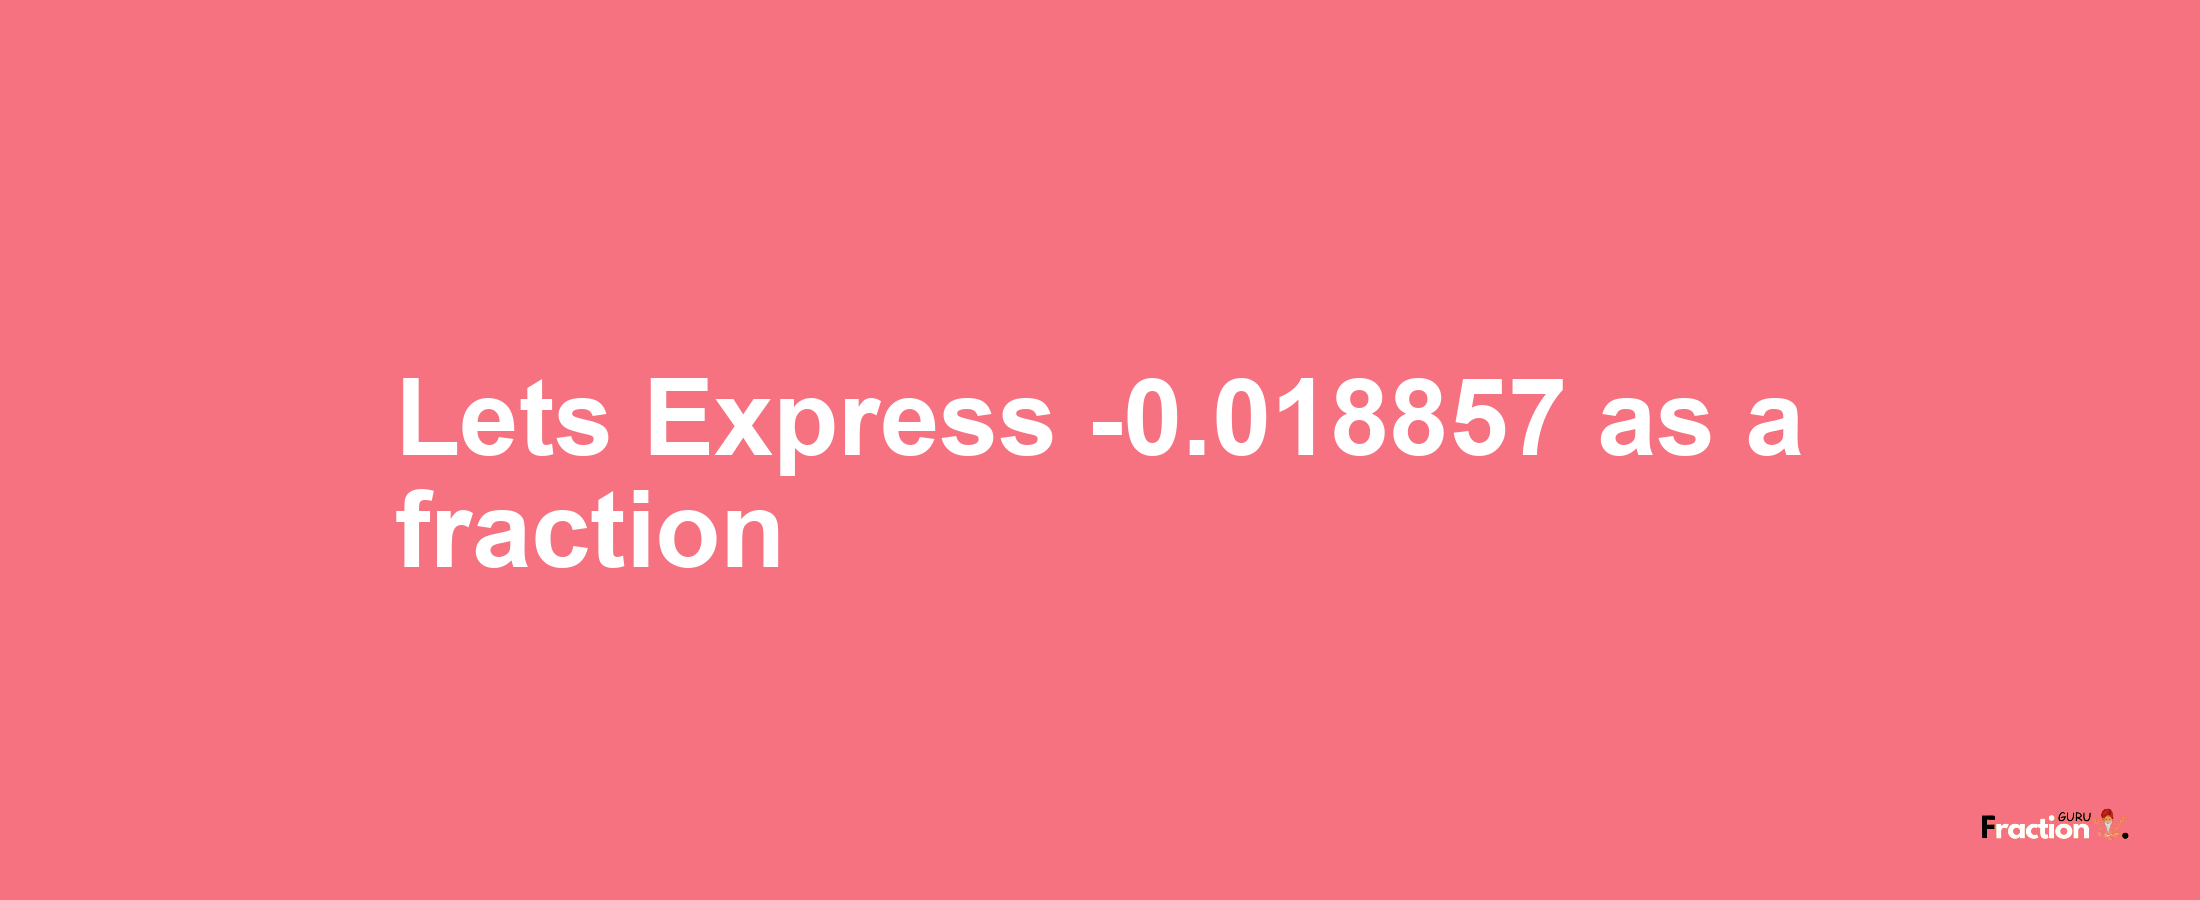 Lets Express -0.018857 as afraction